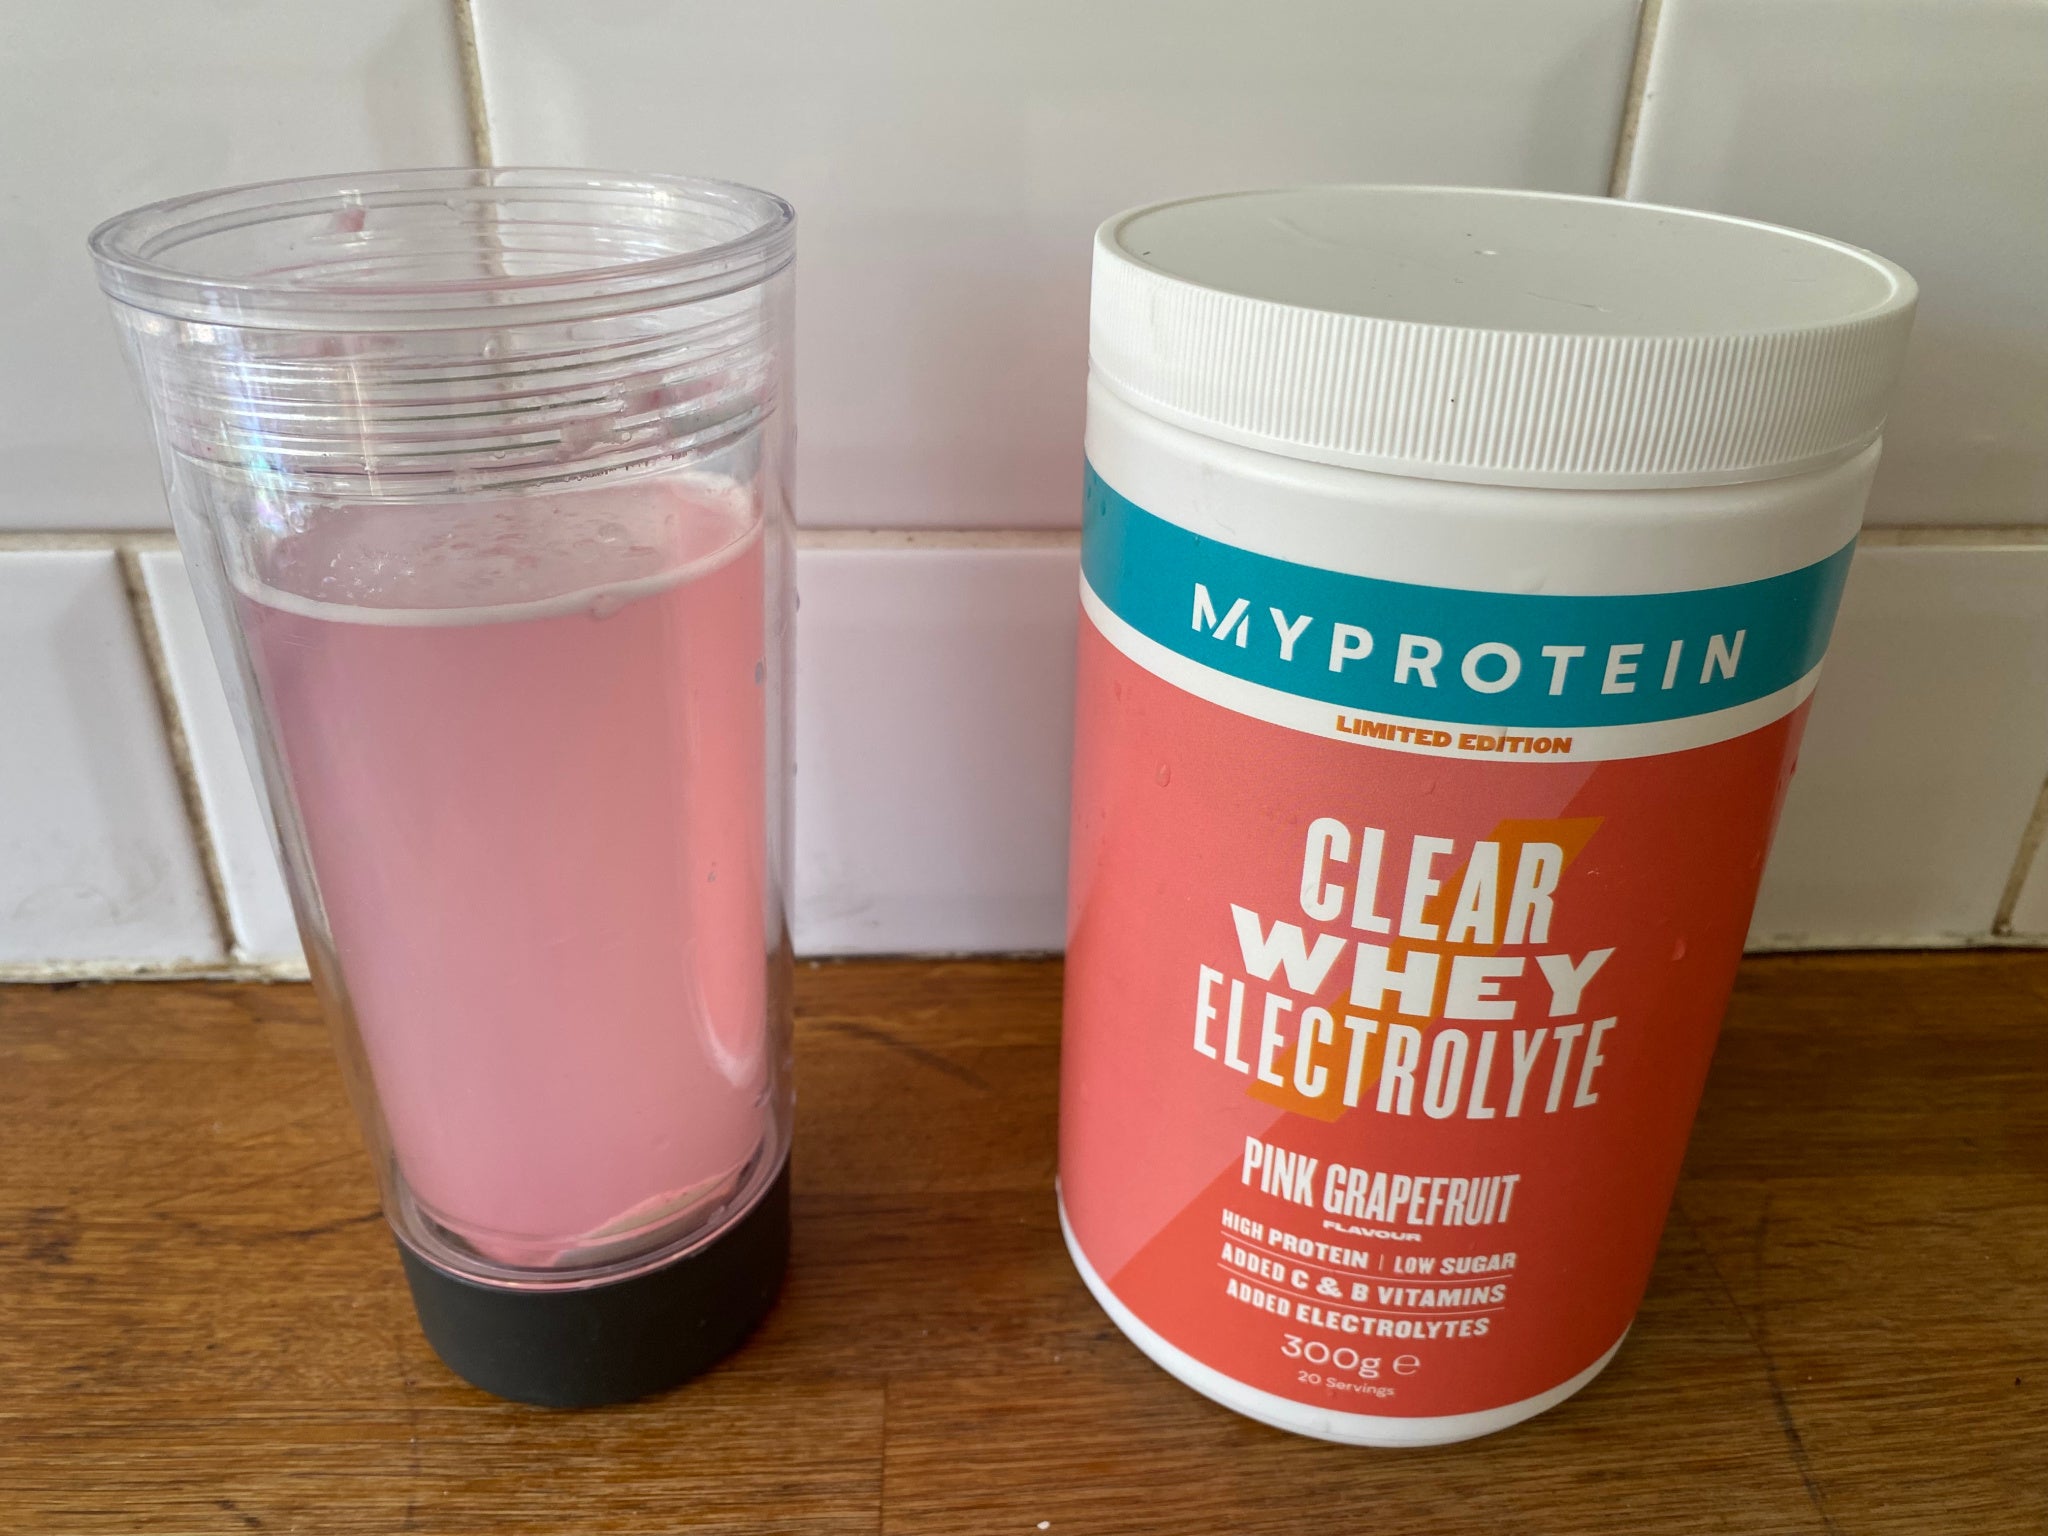 Each 300g tub contains 20 servings of pink grapefruit flavour drink